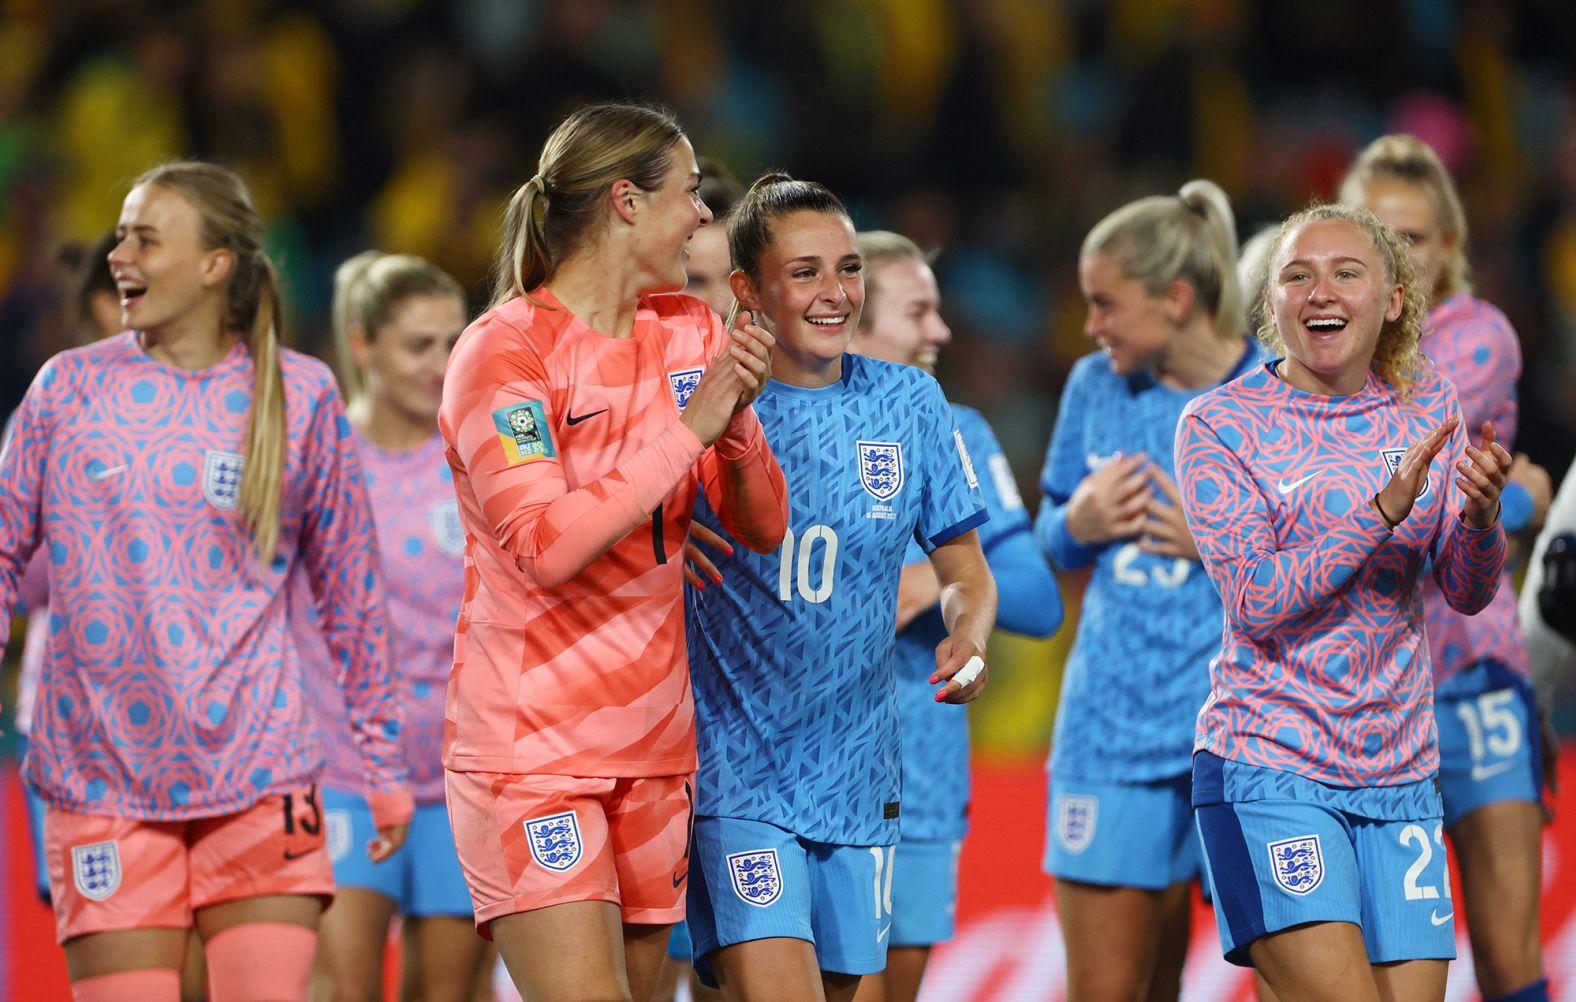 England players celebrate after their <a href="index.php?page=&url=http%3A%2F%2Fwww.cnn.com%2F2023%2F08%2F15%2Ffootball%2Faustralia-england-womens-world-cup-semifinal-spt-intl%2Findex.html" target="_blank">3-1 victory over Australia</a> booked a spot in the final.